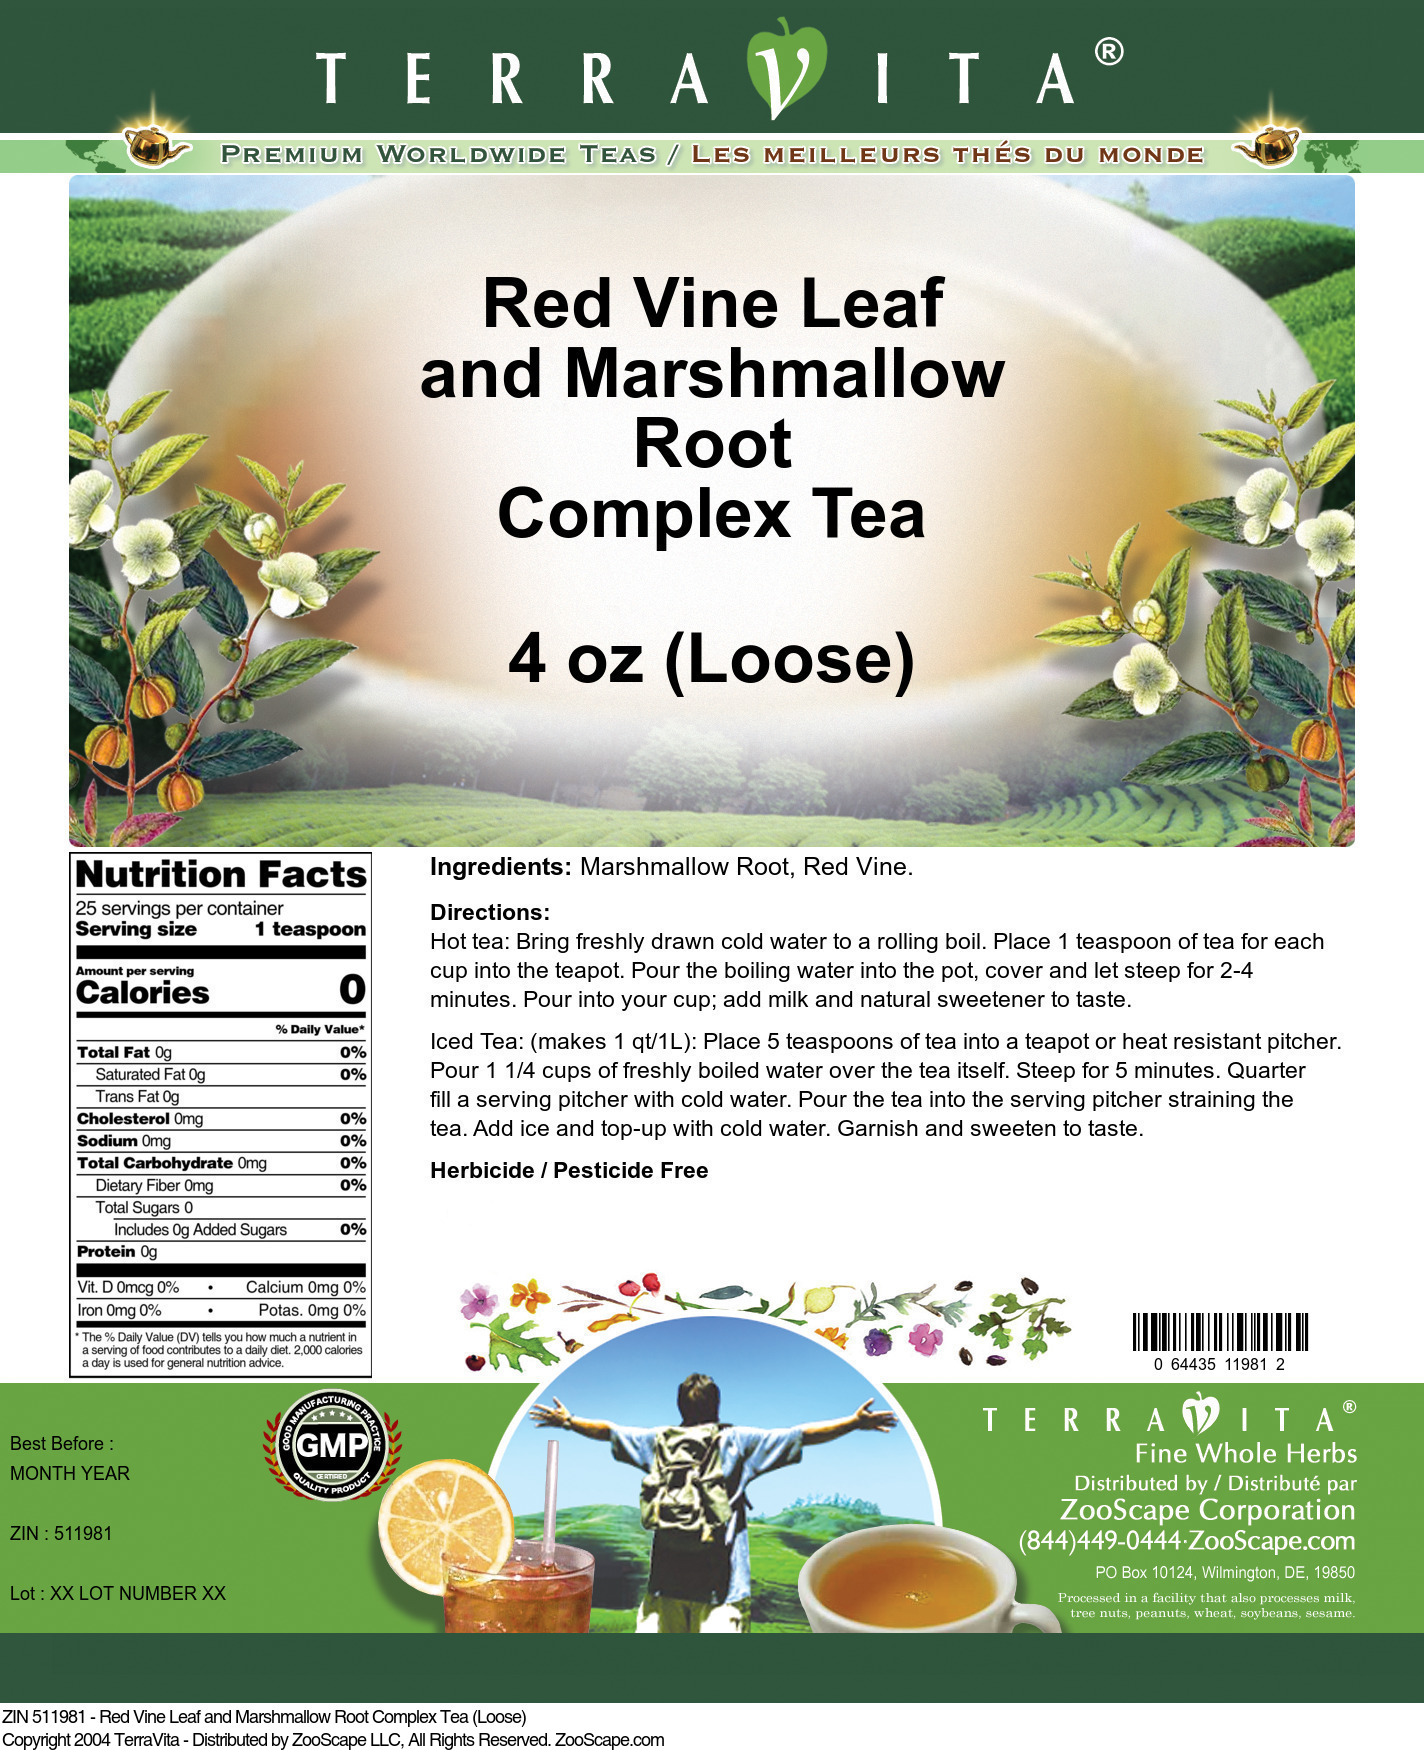 Red Vine Leaf and Marshmallow Root Complex Tea (Loose) - Label